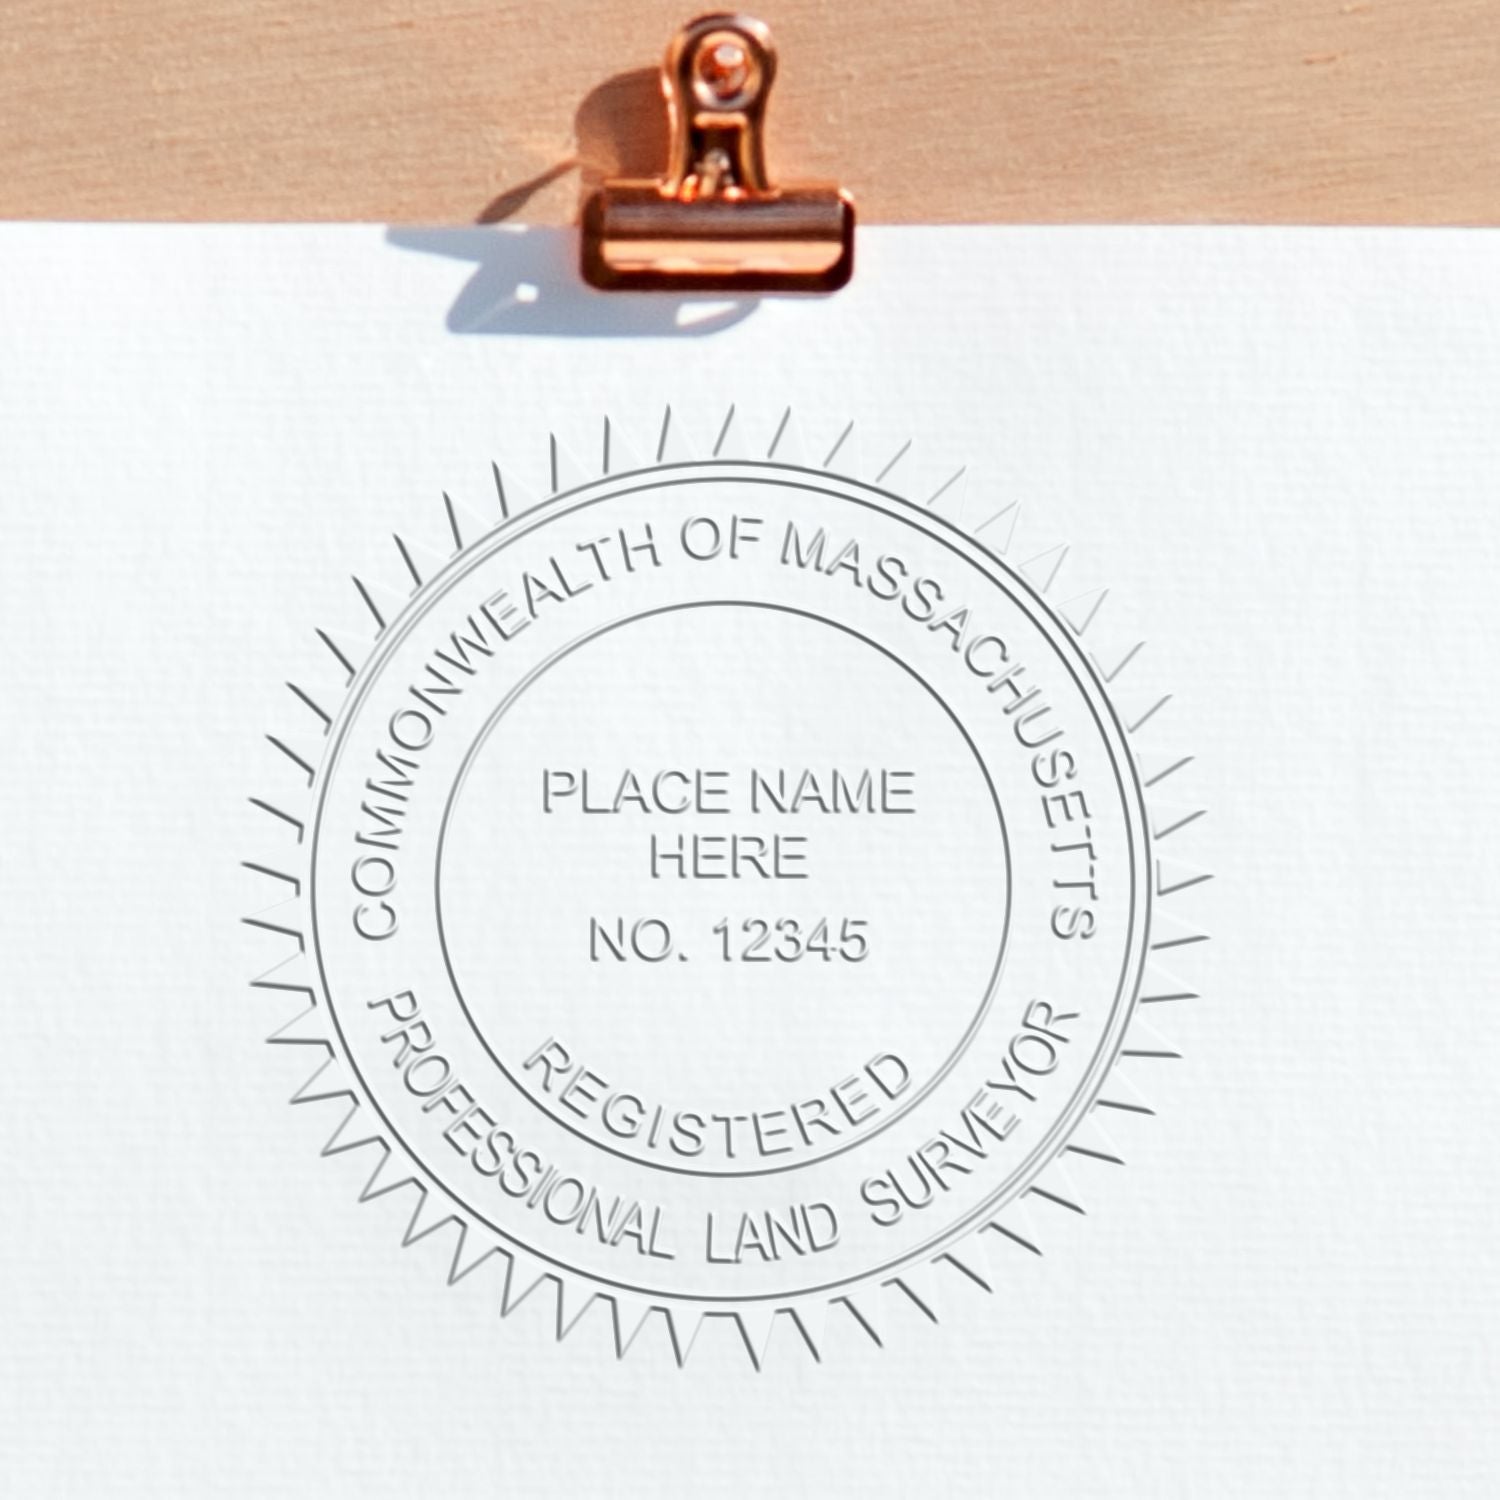 An alternative view of the Heavy Duty Cast Iron Massachusetts Land Surveyor Seal Embosser stamped on a sheet of paper showing the image in use